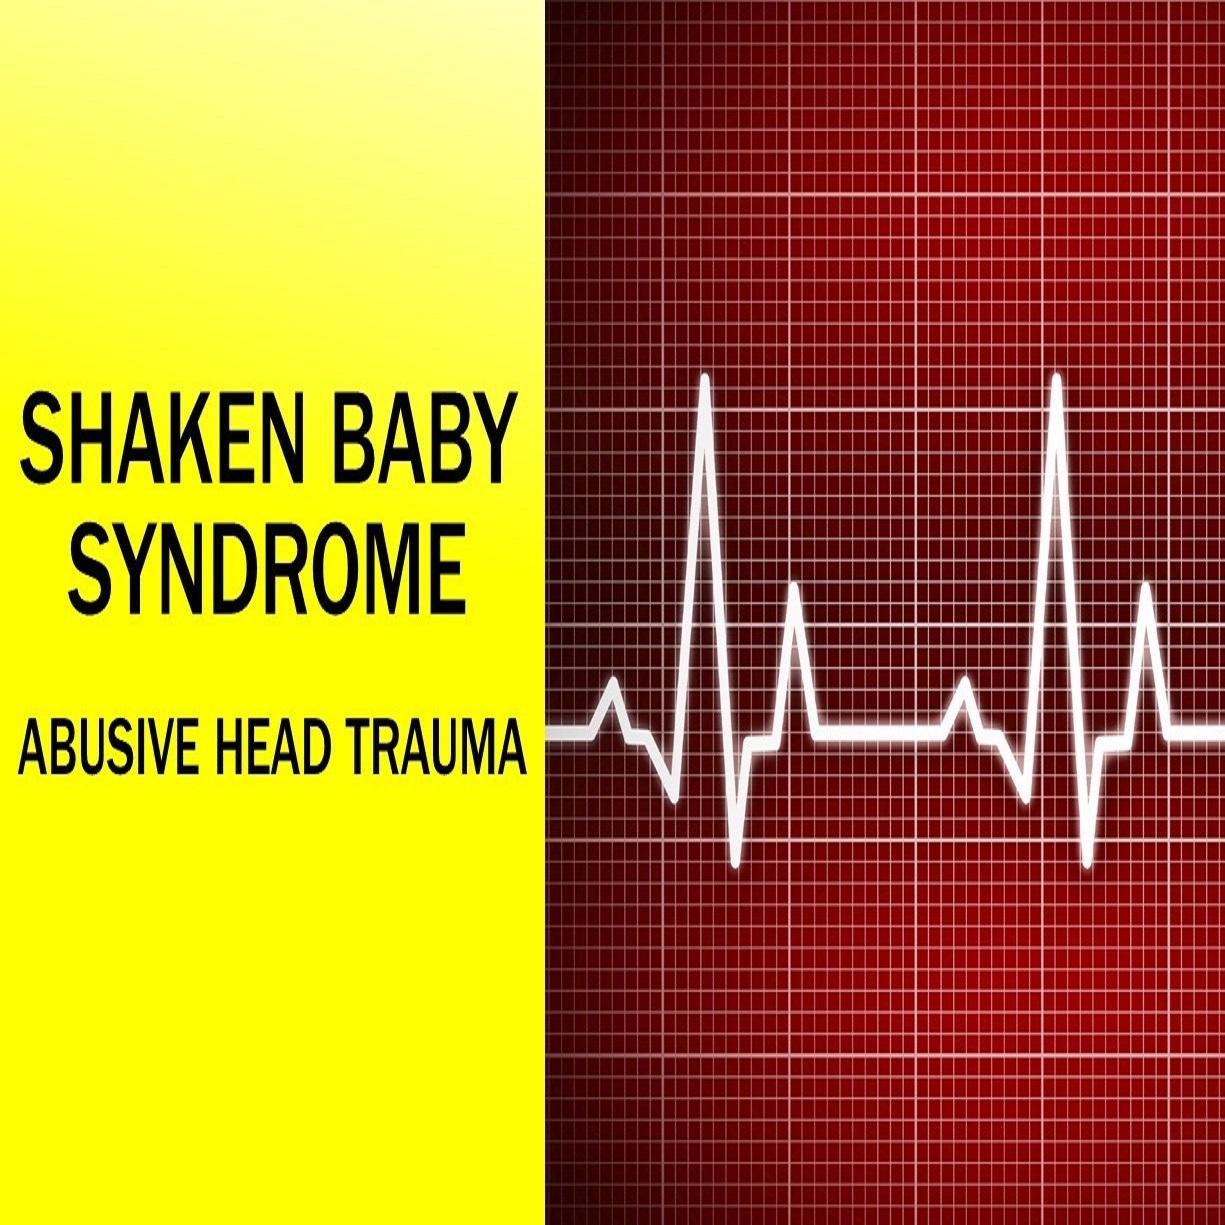 Image for Shaken Baby Syndrome (Abusive Head Trauma)